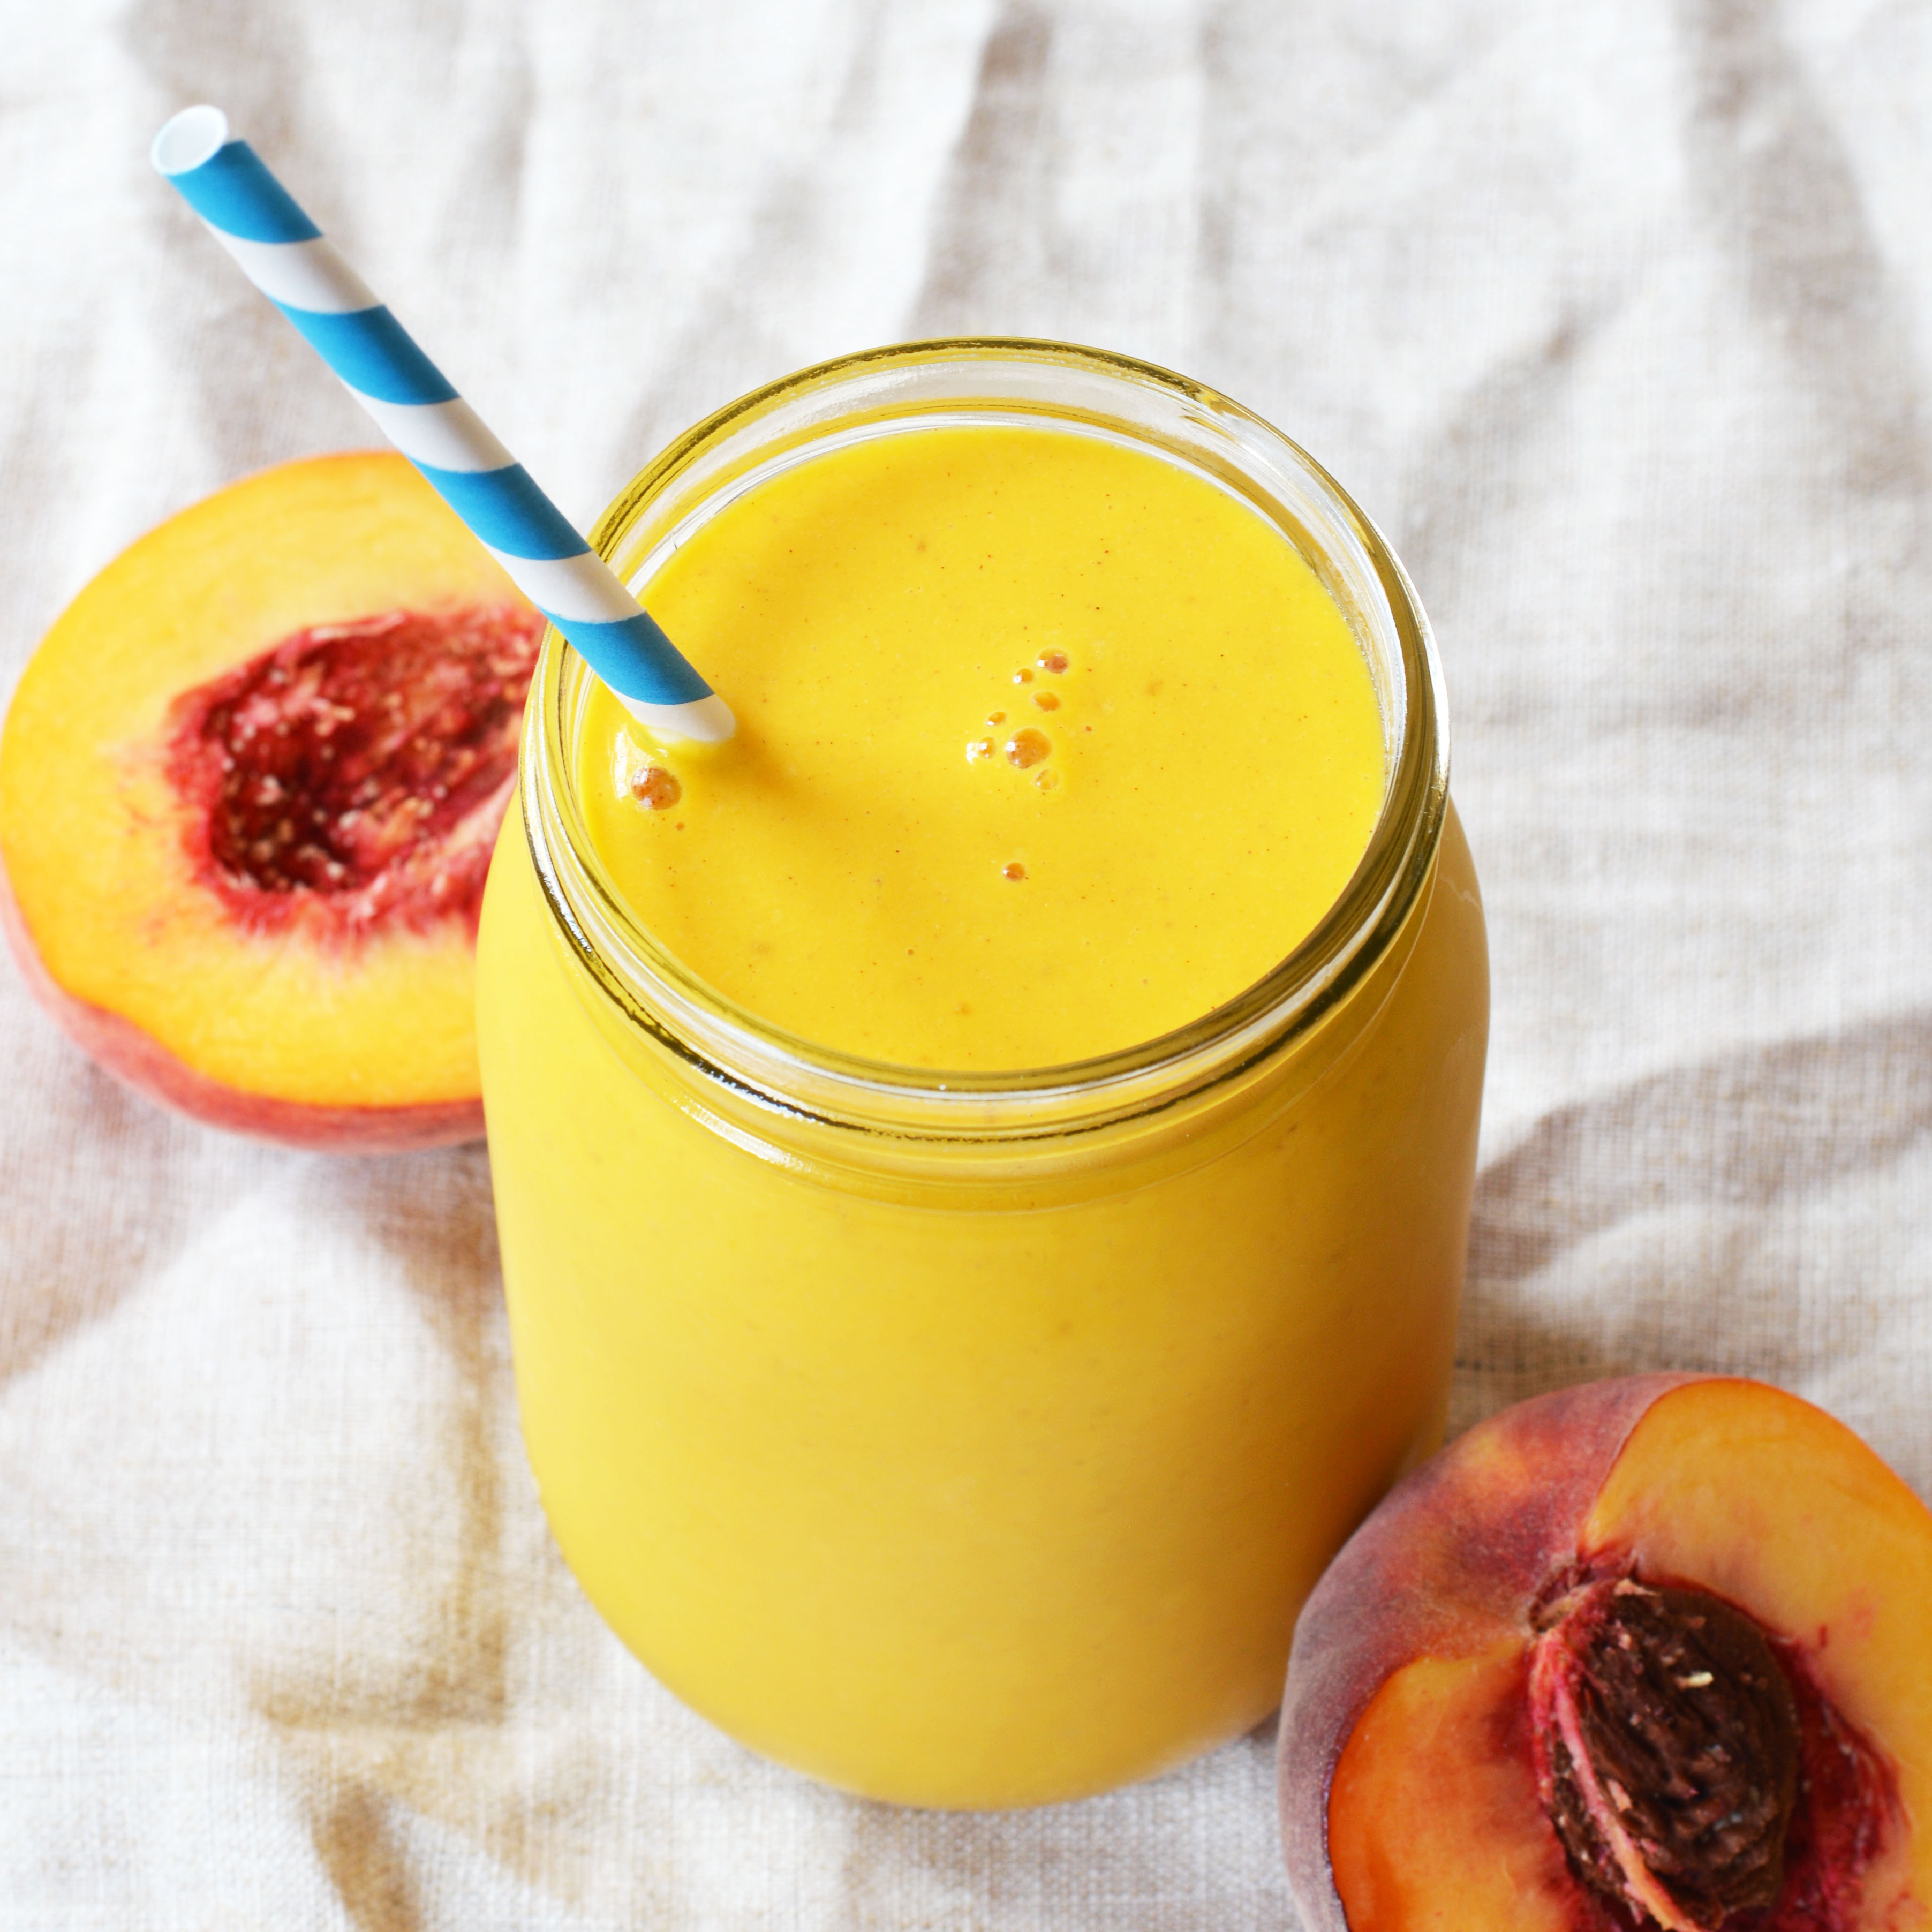 Peachy Tahini Sunshine Smoothie+ 2018 Cook-The-Book New Years Challenge! -  The Colorful Kitchen